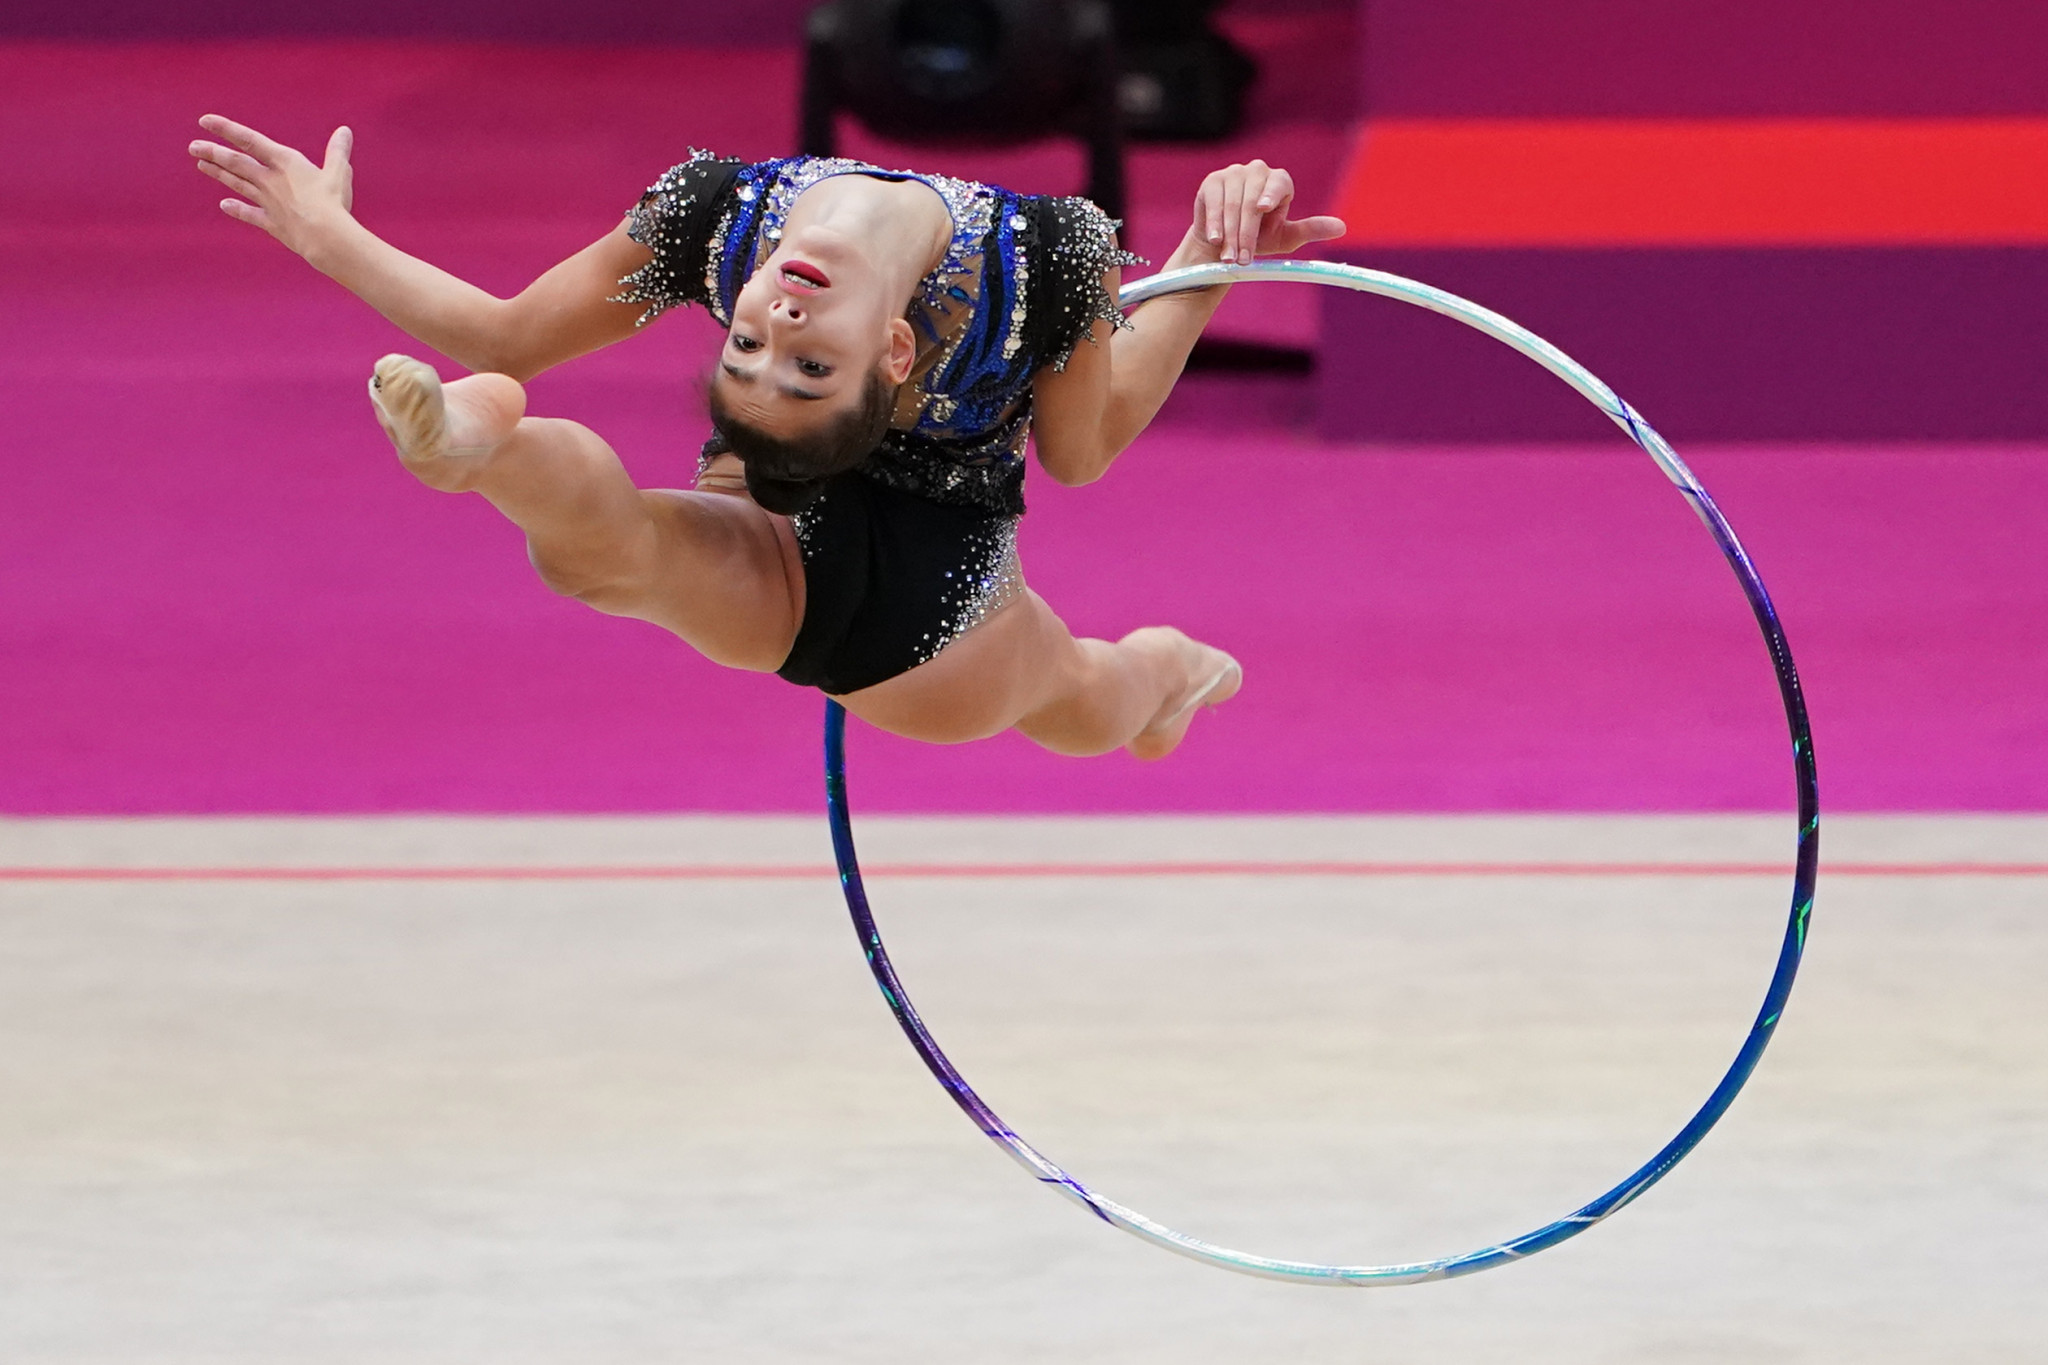 Italy's Sofia Raffaeli took the hoop lead with 33.000 points at the Rhythmic Gymnastics World Cup in Baku ©Getty Images